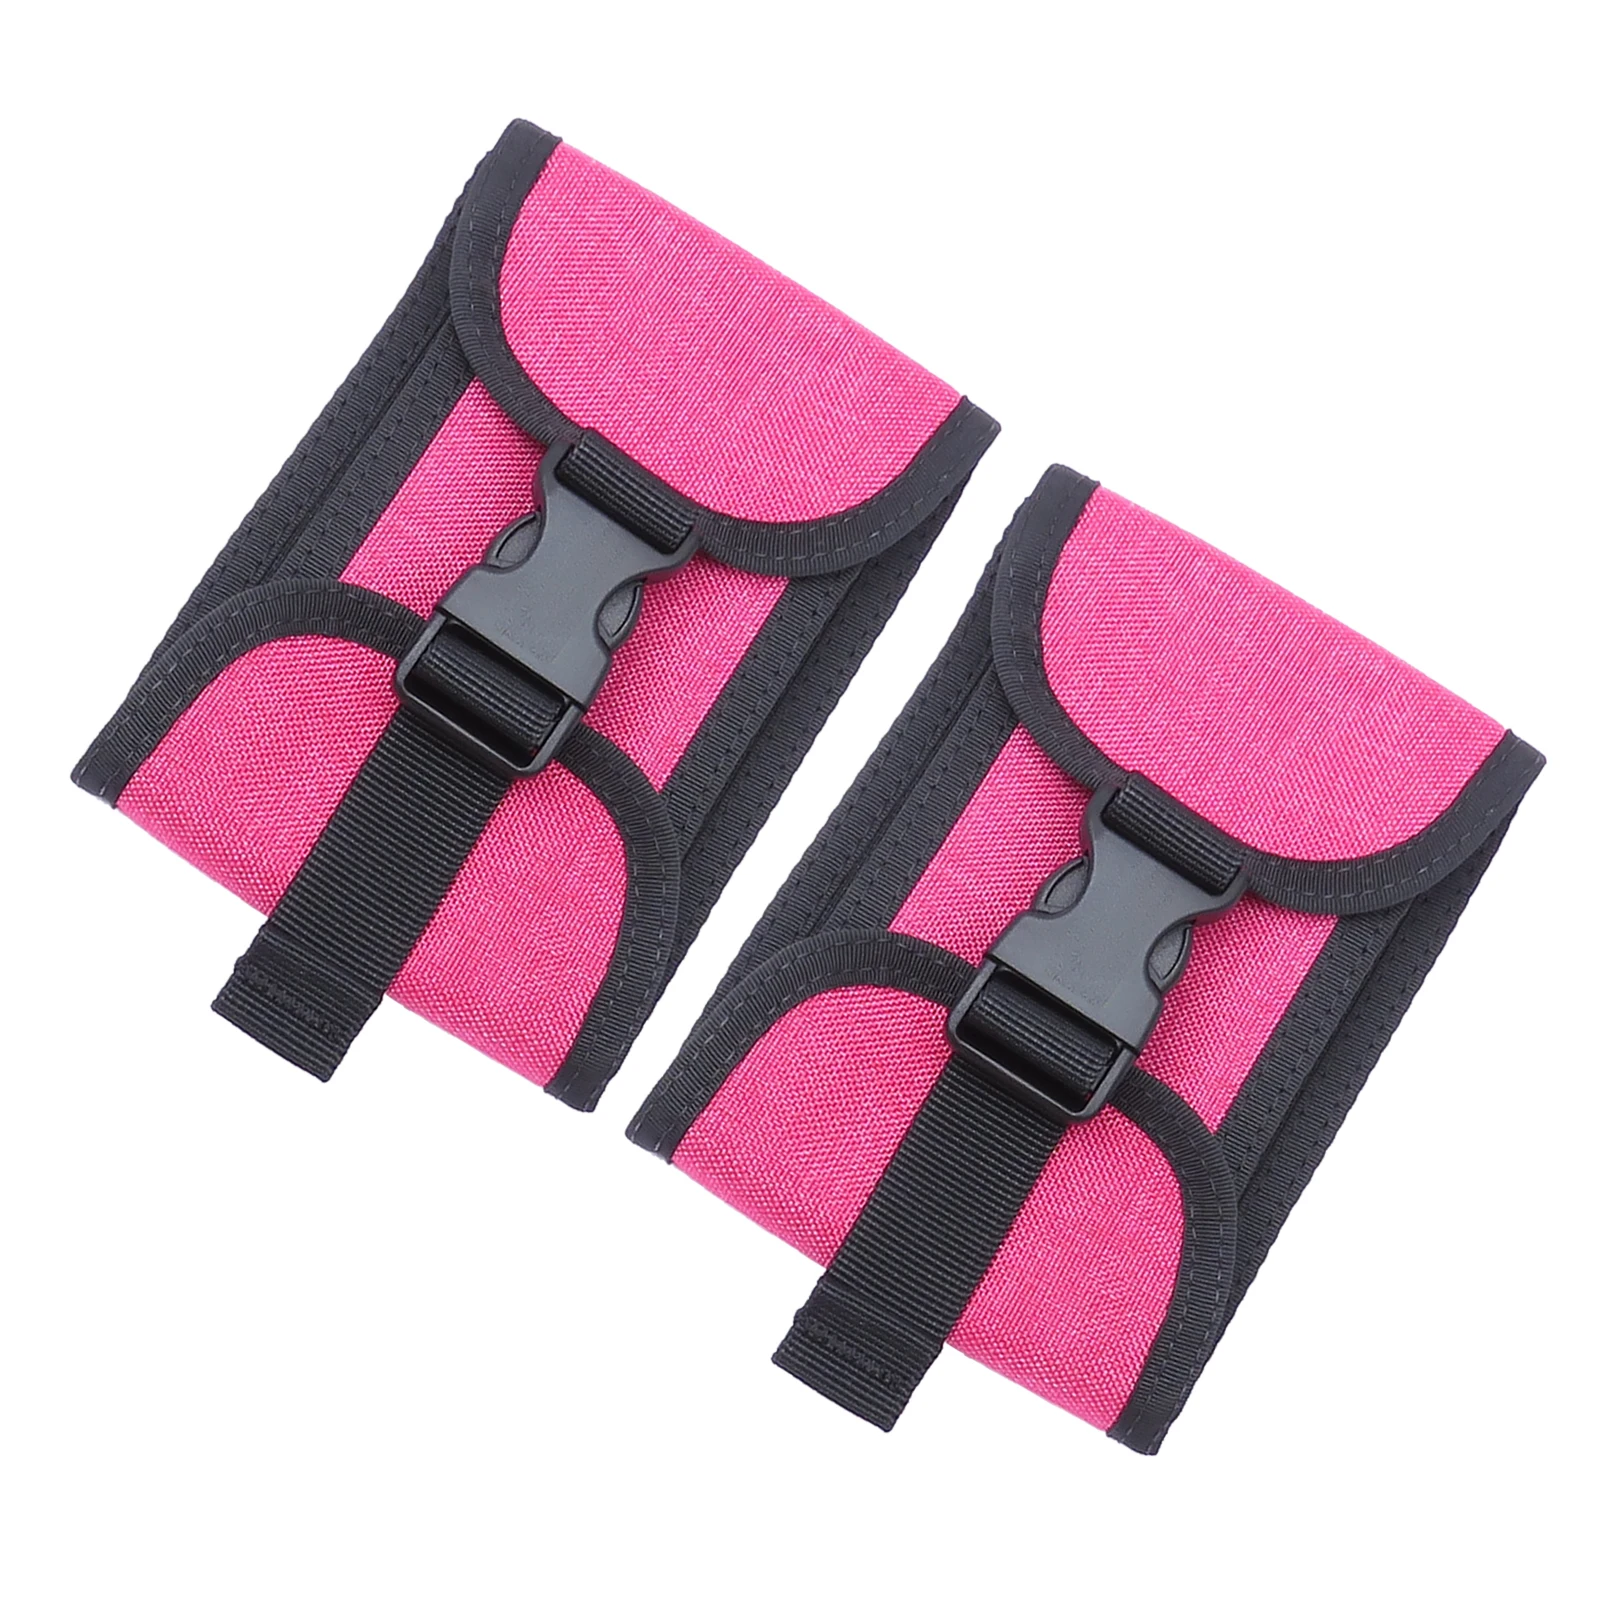 2pcs Scuba Diving Weight Pockets Harness Empty Snorkeling Backplate Donut Weight Belt Pouch w/ 2kg 5lbs Quick Release Buckle